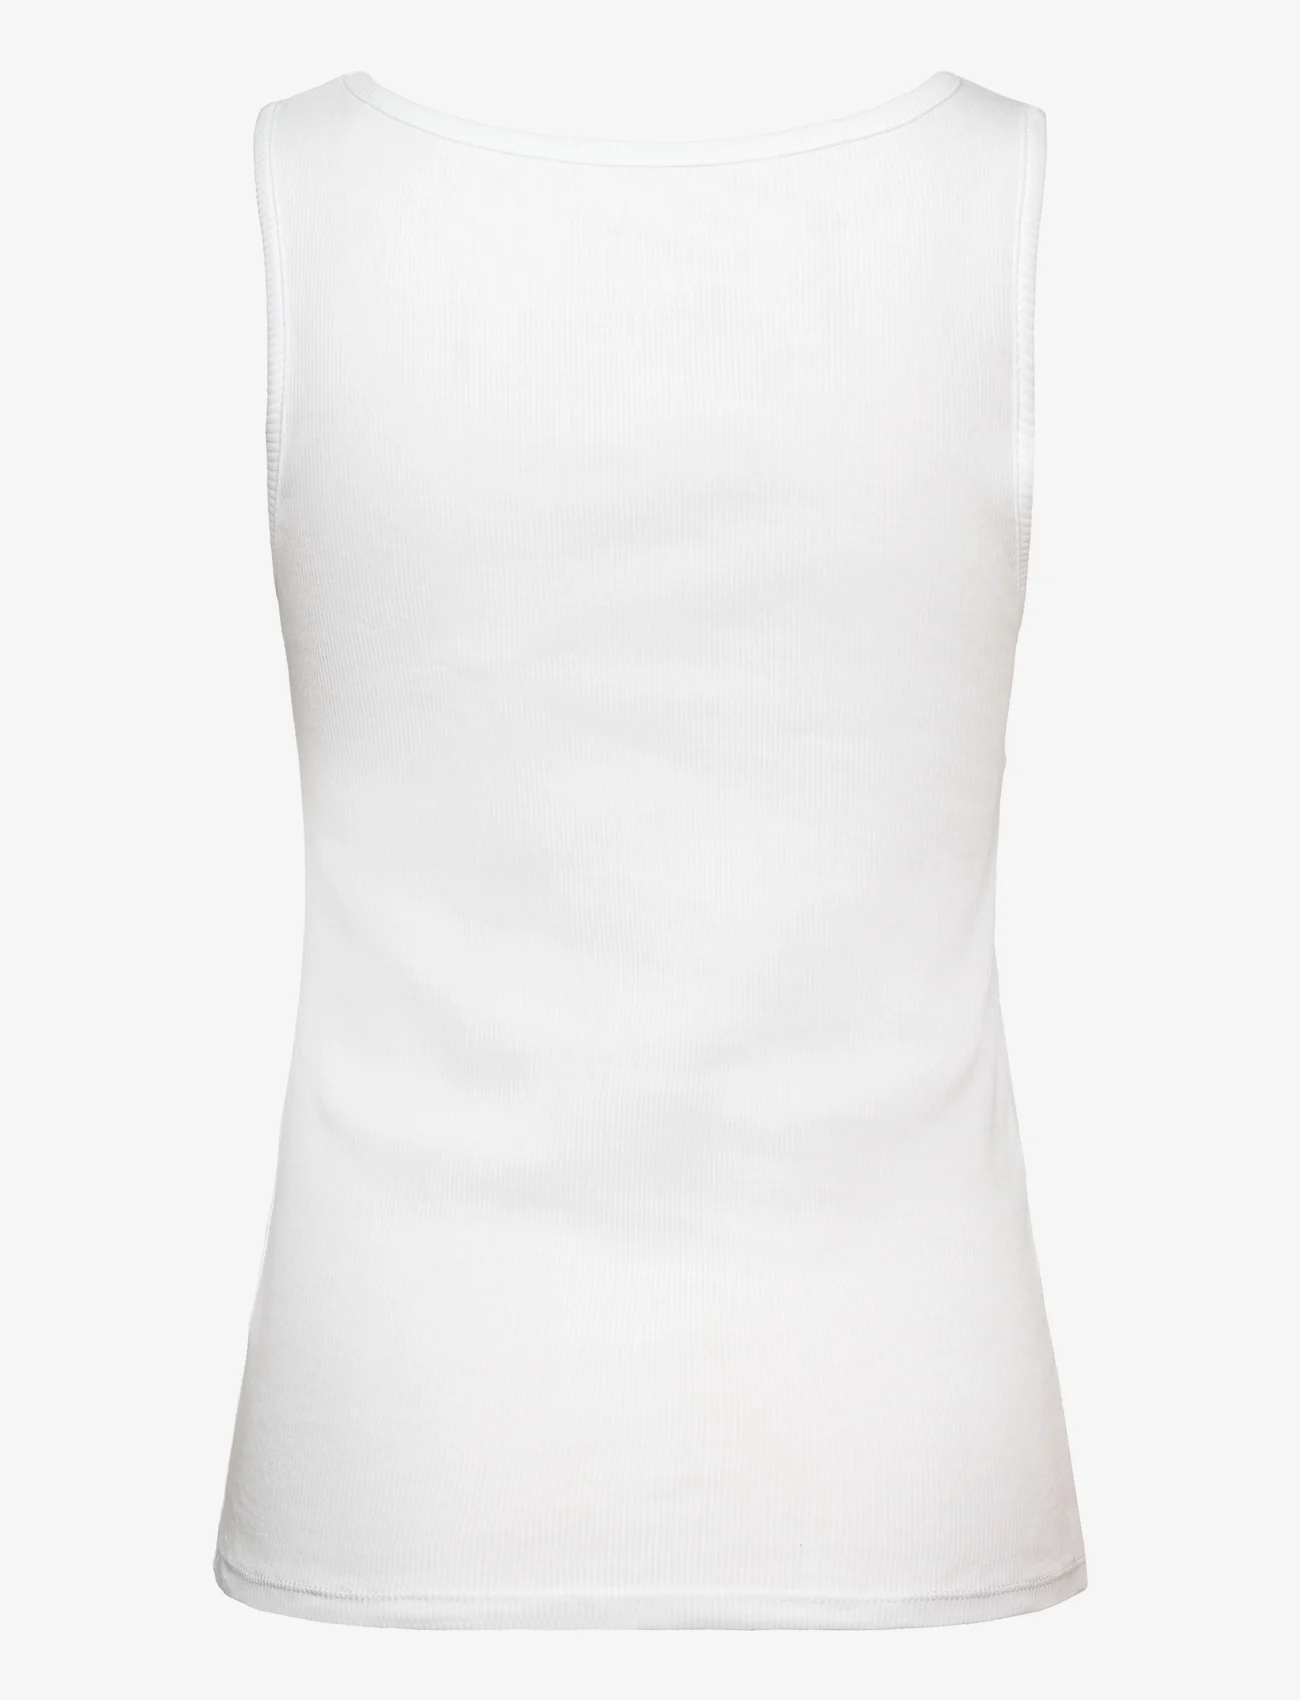 GUESS Jeans - LOGO TANK TOP - sleeveless tops - pure white - 1